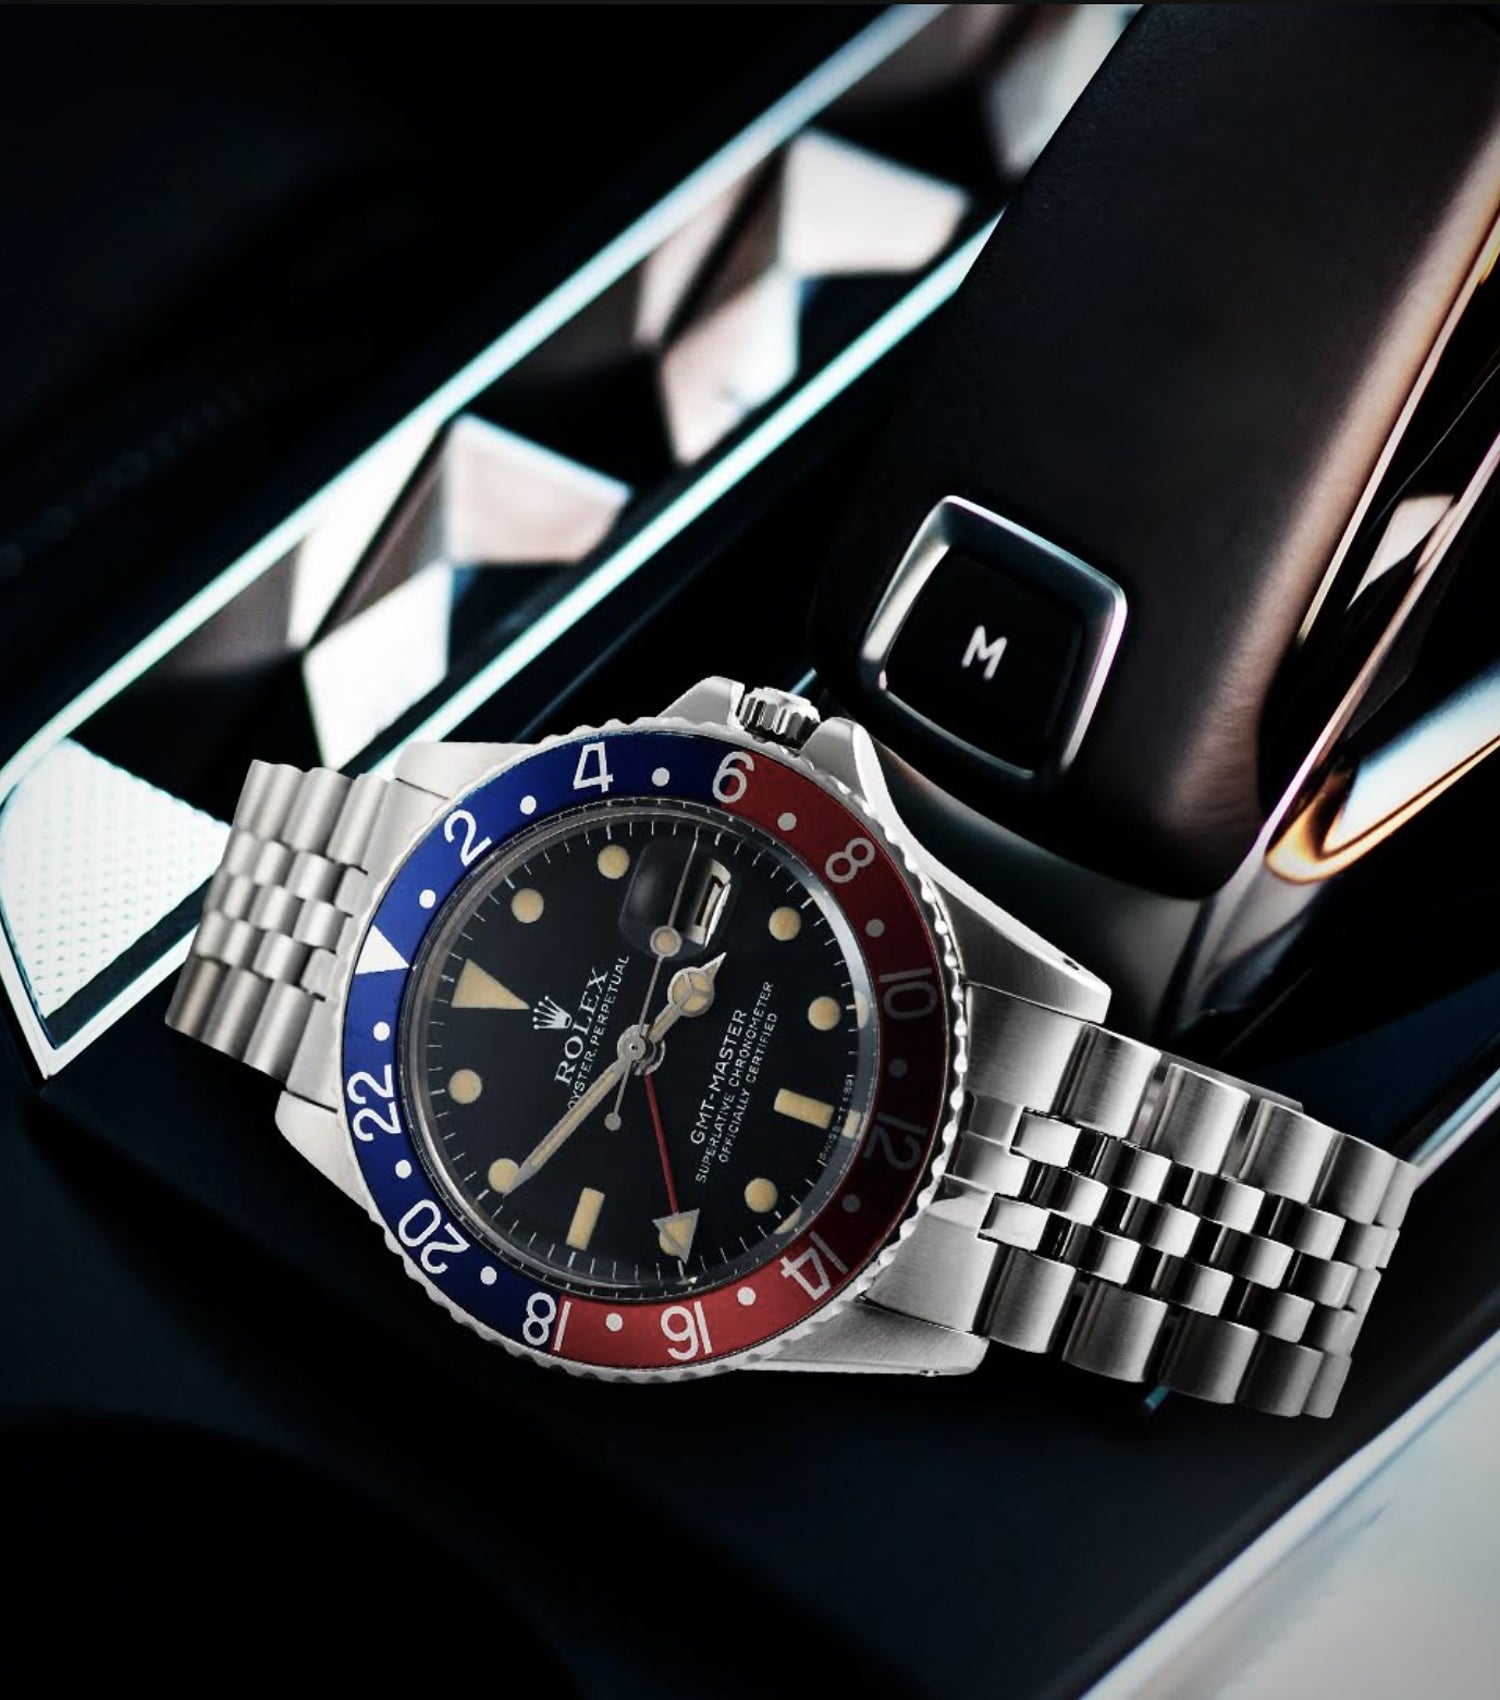 The Definitive Guide to the New 2020 Rolex Submariner - Crown